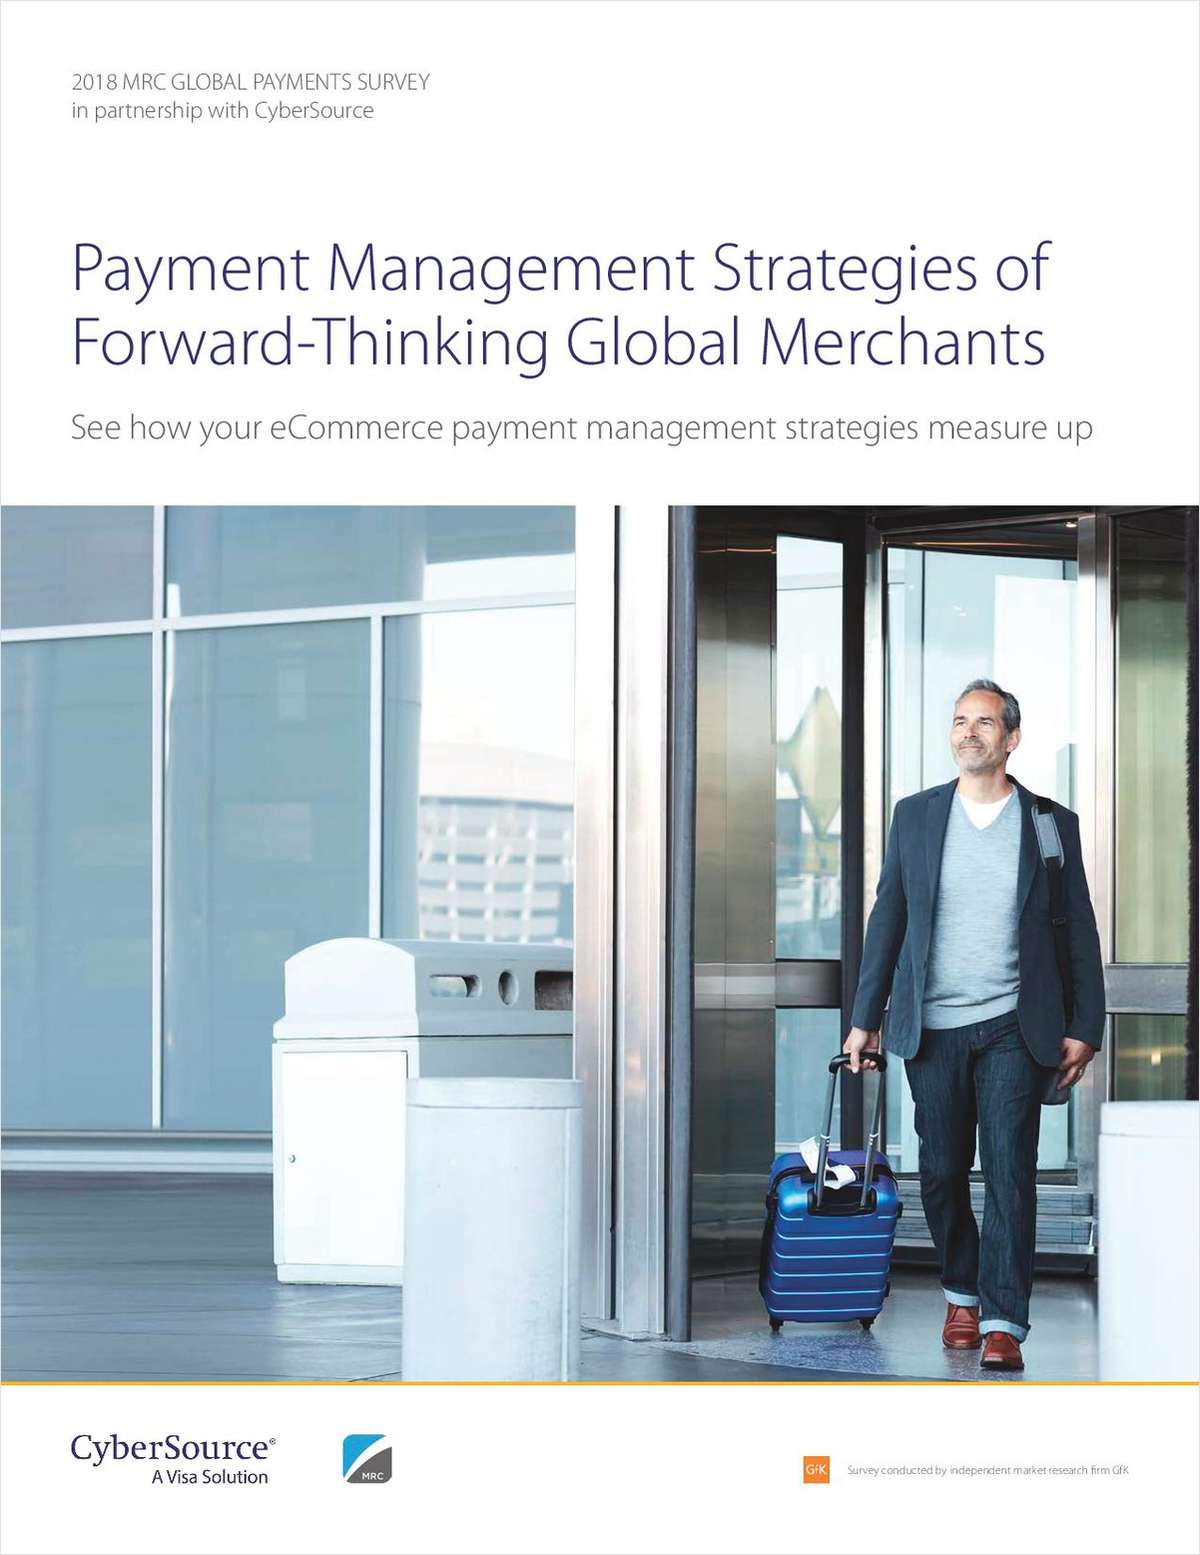 The Payment Management Strategies of Forward-Thinking Merchants